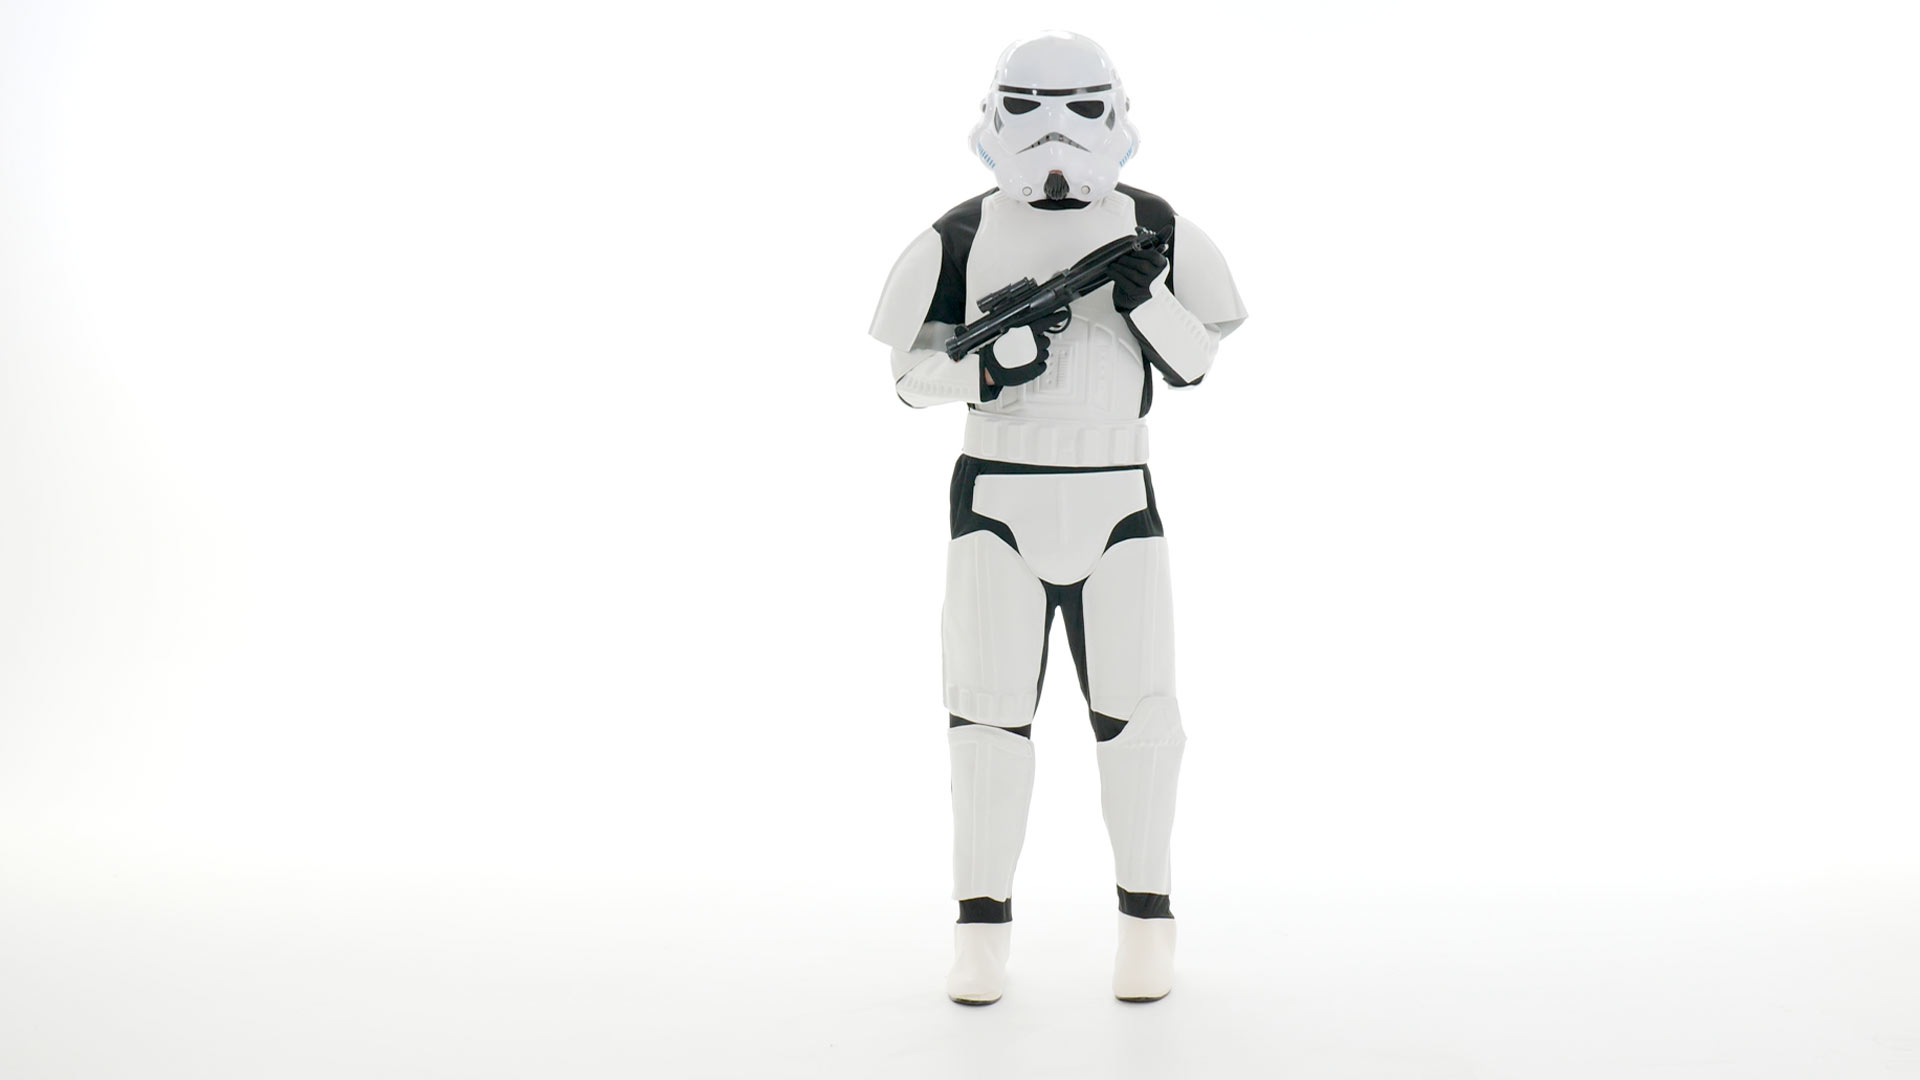 Being one of the Empire's leading Stormtoopers requires loyalty, honor and the ability to find the droids that you are looking for. The licensed Star Wars costume brings you the look at an affordable price.